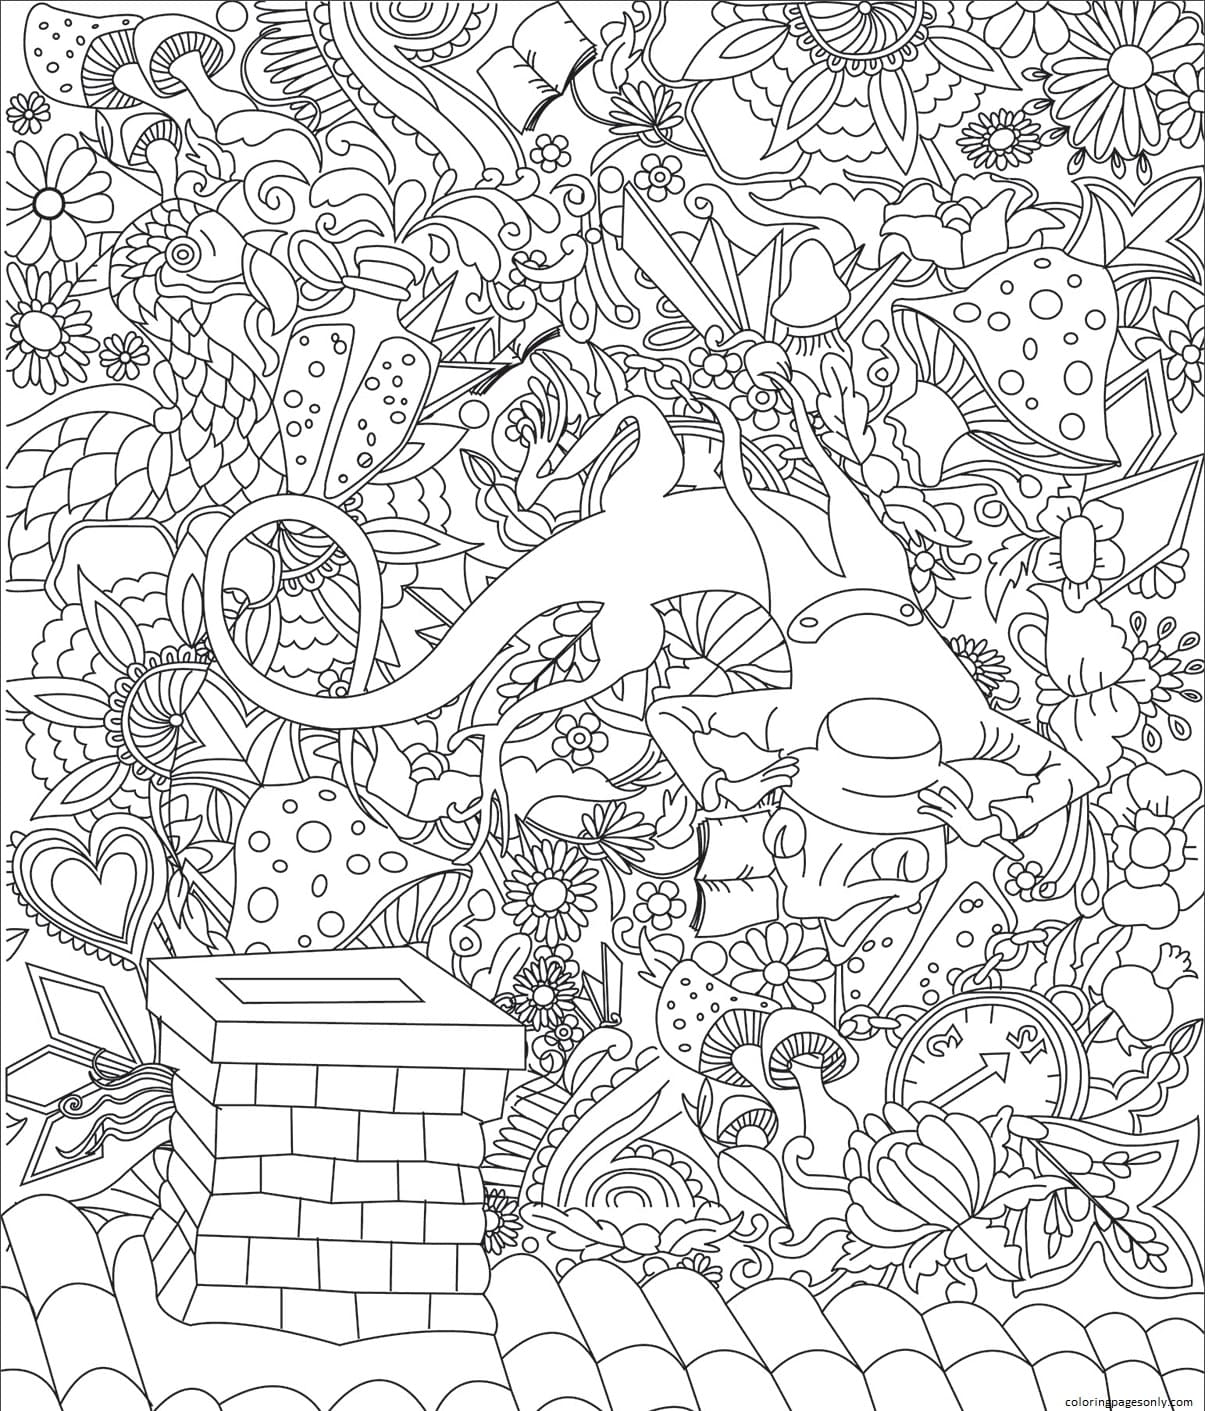 Bill The Lizard Pops Coloring Pages